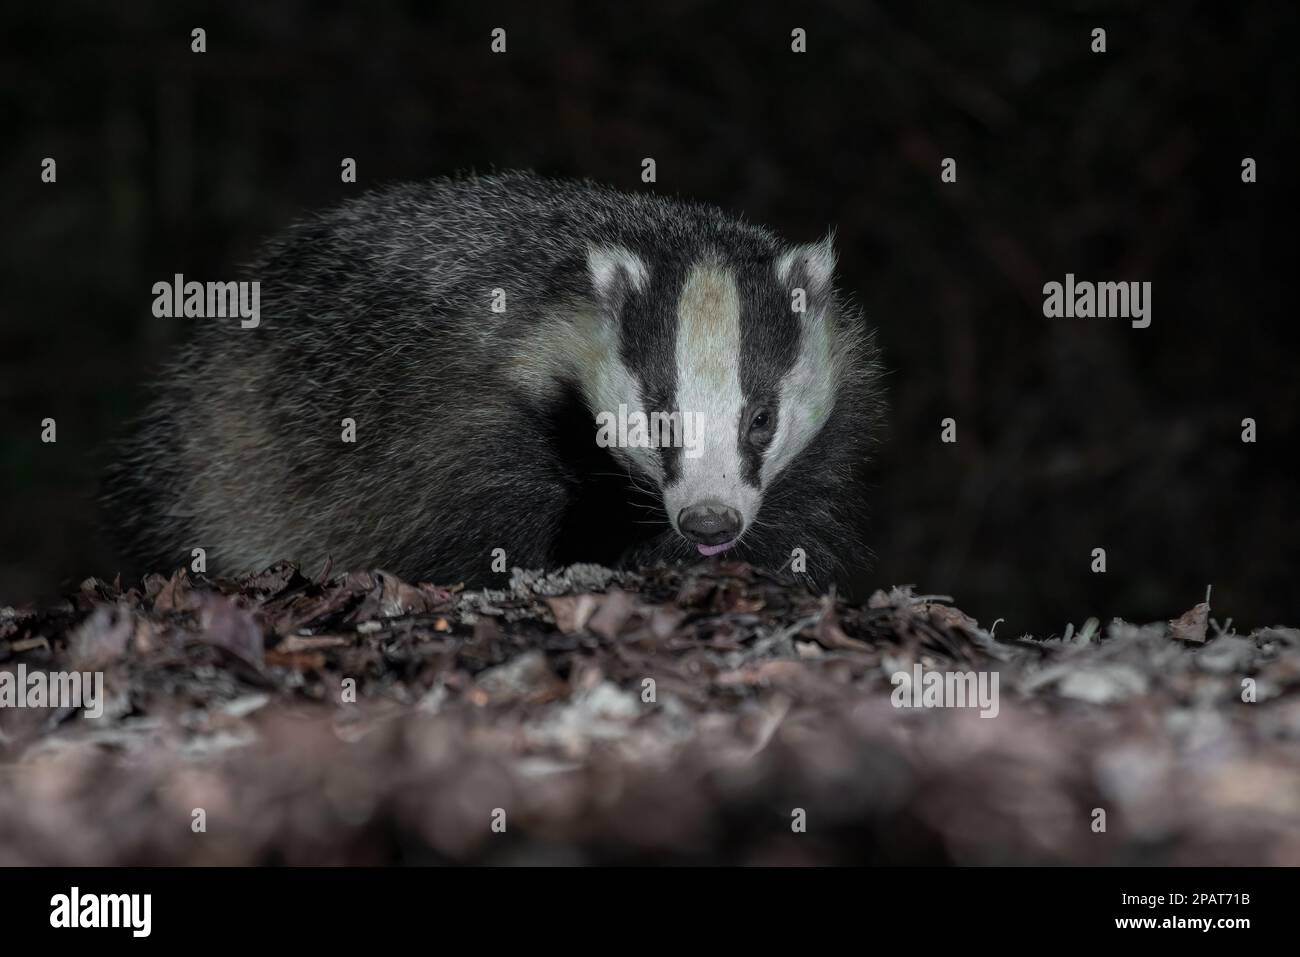 Close up of the head and face of a badger as it is foraging in the leaves. Taken at night with flash, there is copy space around the animal Stock Photo